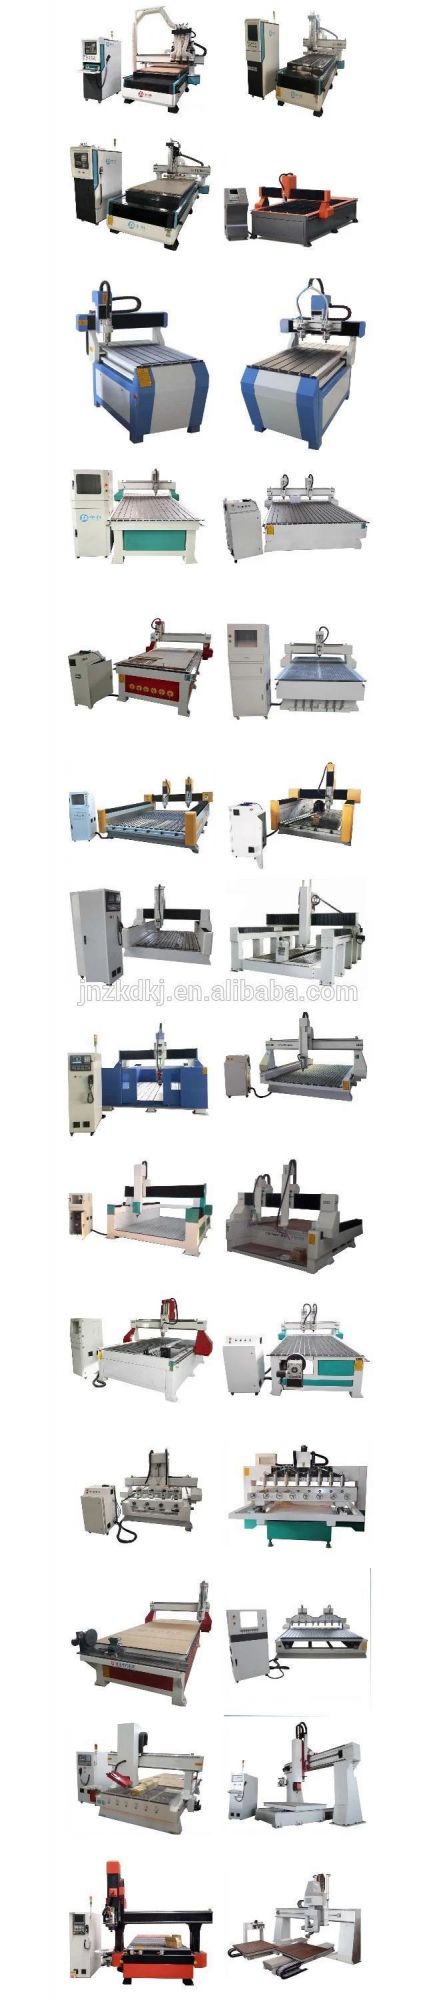 Atc CNC Router for Cutting and Engraving / Automatic Tool Change